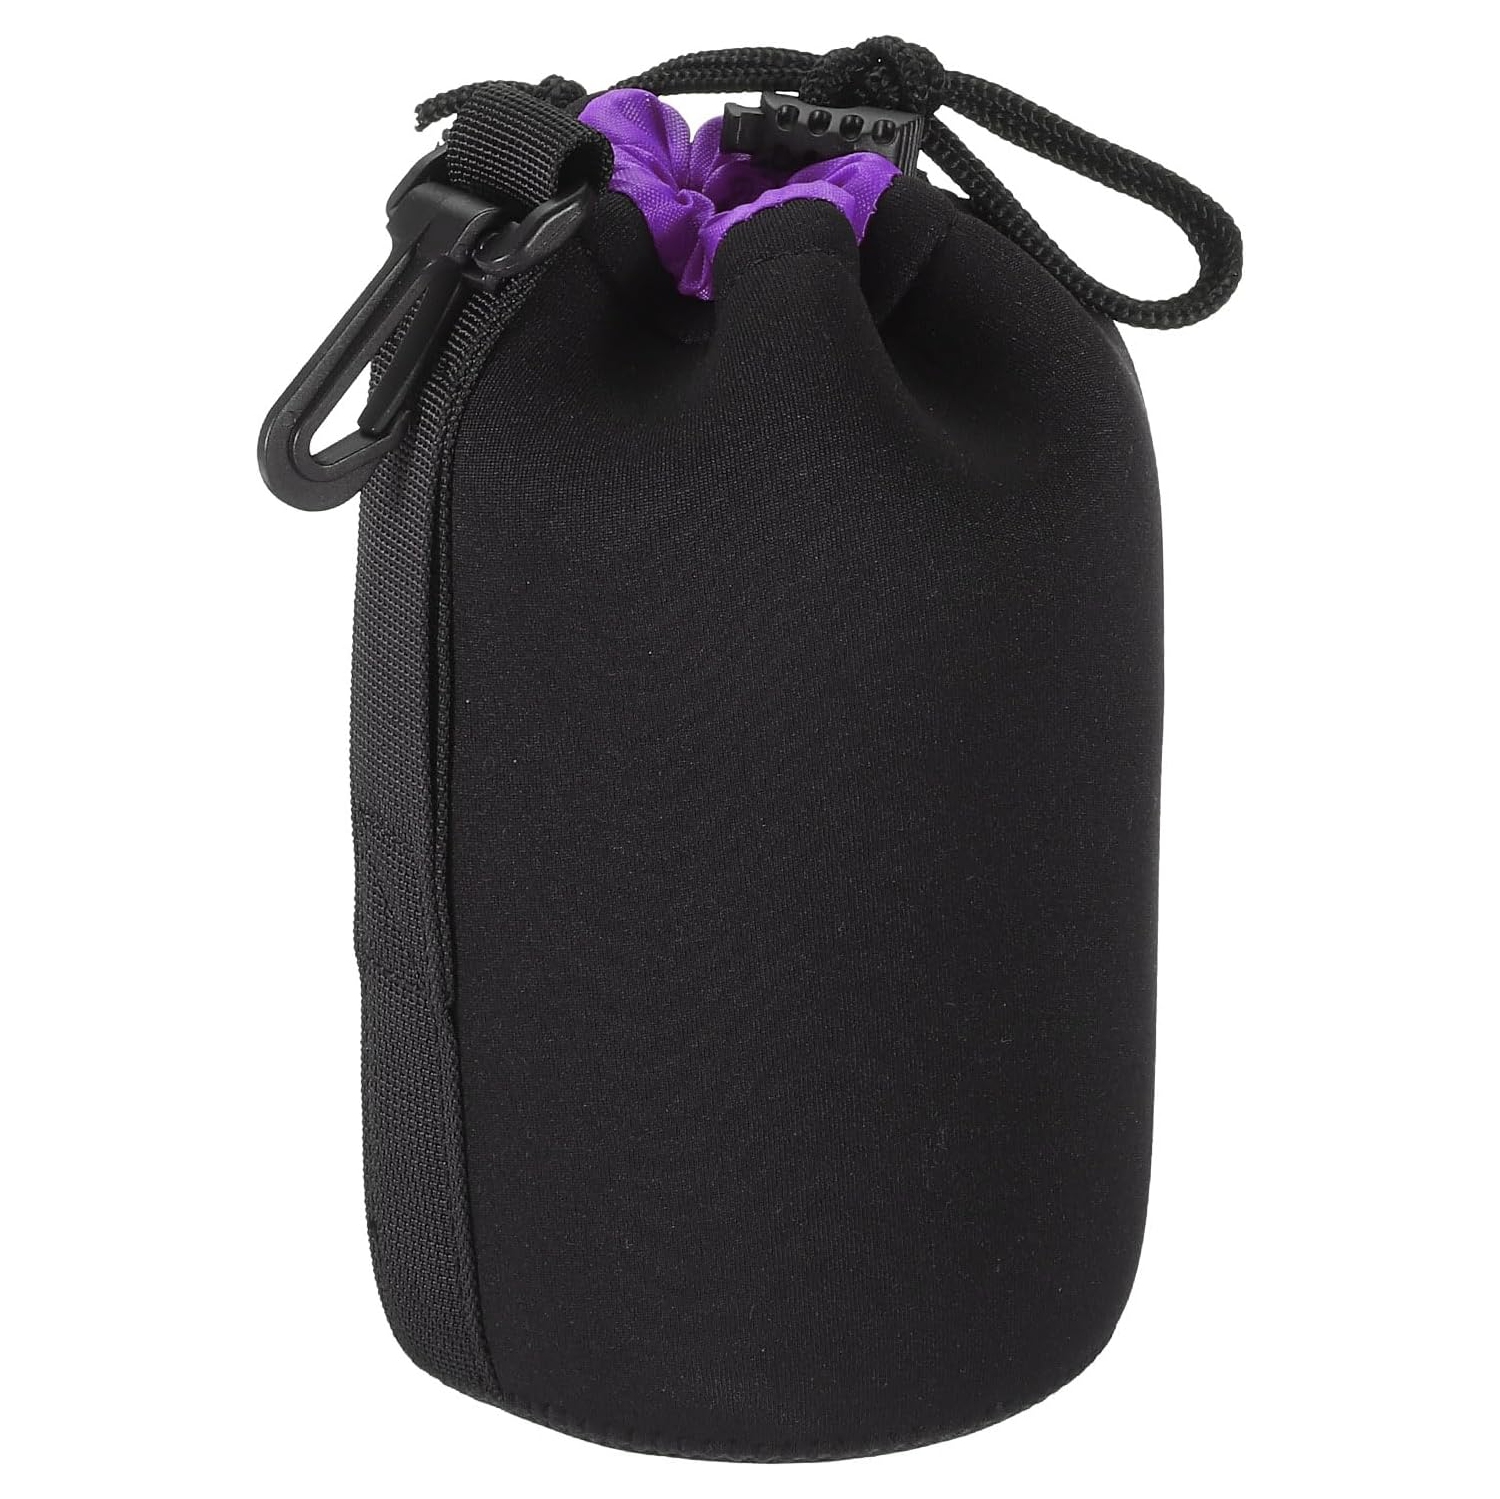 Camera Lens Bag, 3.5" IDx7.1" H Drawstring Lens Pouch with Thick Protective Neoprene, Lens Case for DSLR Camera